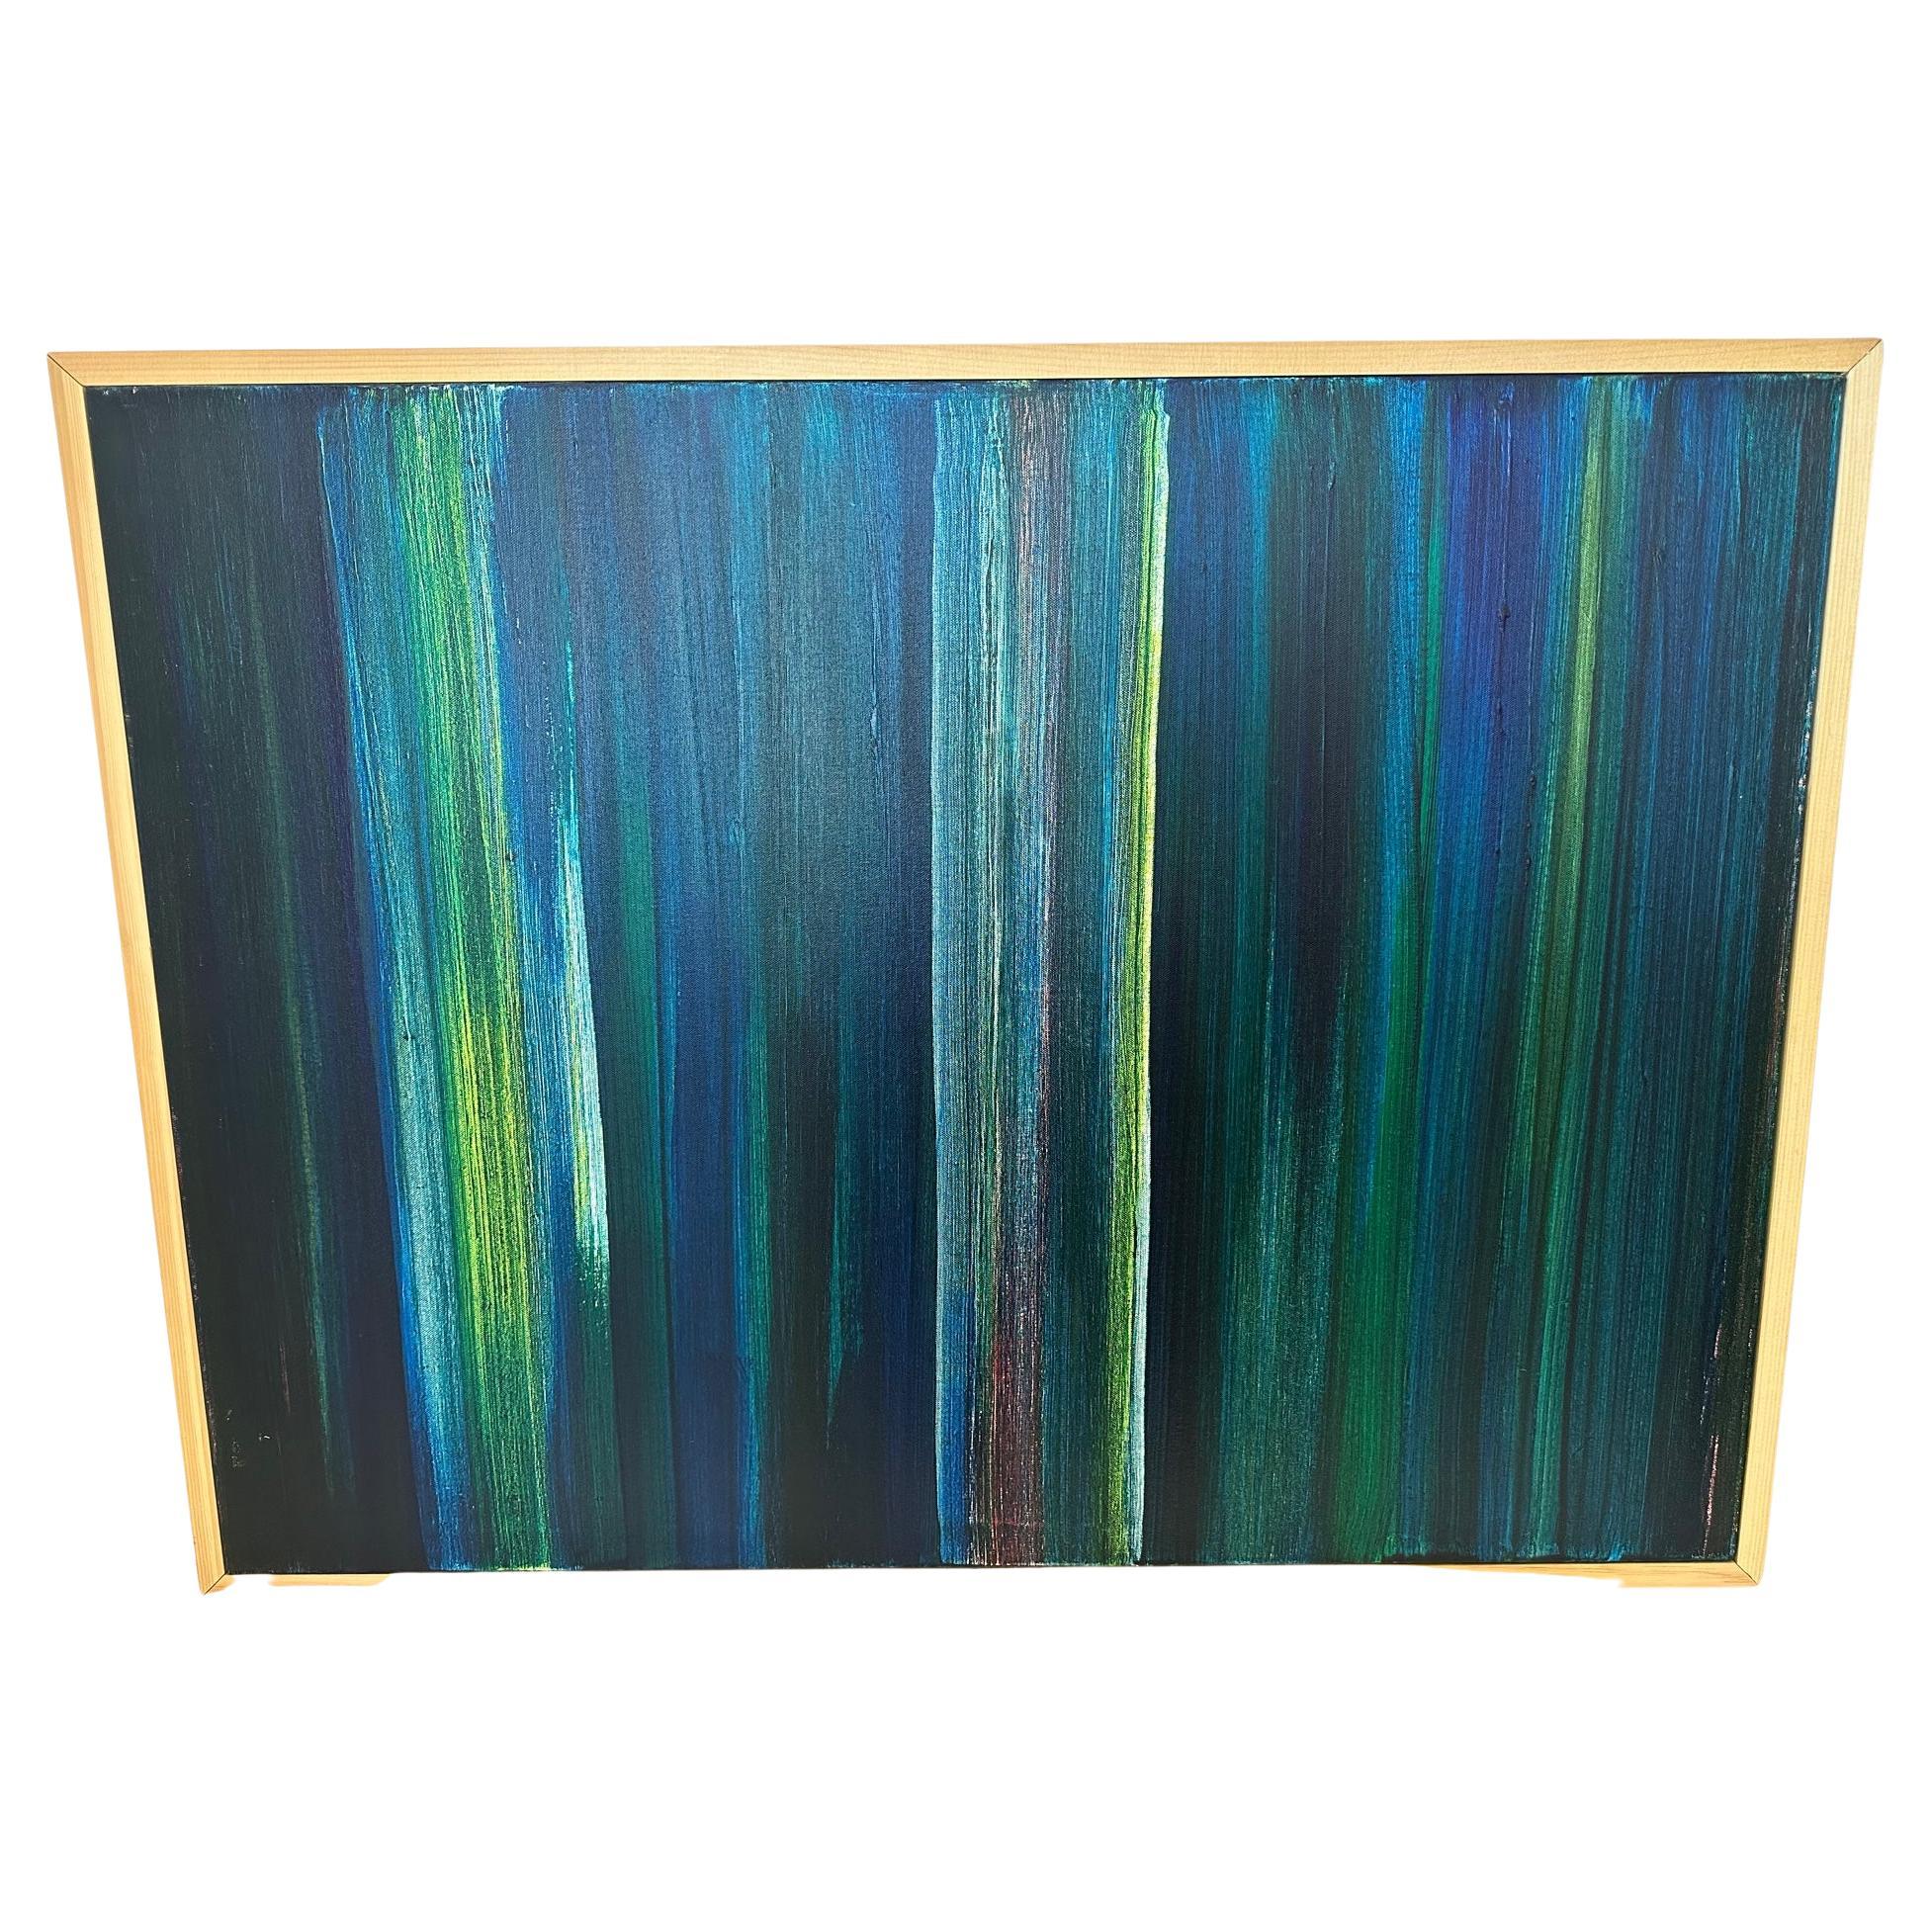 Contemporary Abstract Striped Painting in Blues & Greens im Angebot